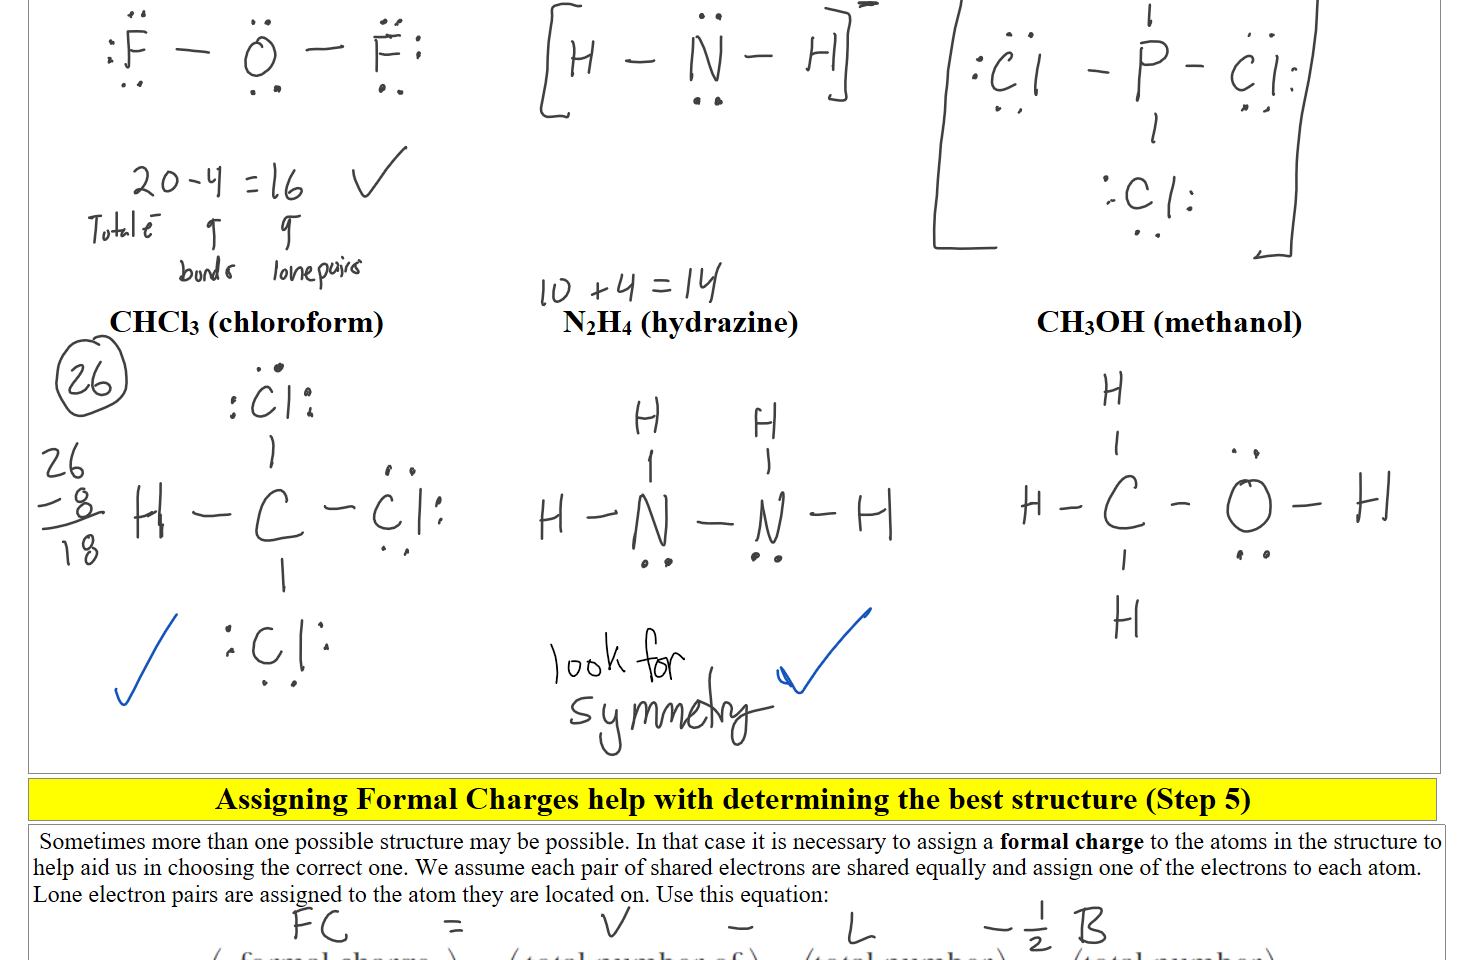 











 CHCl3 (chloroform)












N2H4 (hydrazine)
CH3OH (methanol)
Assigning Formal Charges help with determining the best structure (Step 5)
 Sometimes more than one possible structure may be possible. In that case it is necessary to assign a formal charge to the atoms in the structure to help aid us in choosing the correct one. We assume each pair of shared electrons are shared equally and assign one of the electrons to each atom. Lone electron pairs are assigned to the atom they are located on. Use this equation:

Untitled picture.png formal charge 
on an atom In 
a Lewis formula 
total number of 
= valence electrons 
in the free atom 
total number 
of lone-pair 
electrons 
total number 
of shared 
2 
electrons 
Ink Drawings
Ink Drawings
Ink Drawings
Ink Drawings
Ink Drawings
Ink Drawings
Ink Drawings
Ink Drawings
Ink Drawings
Ink Drawings
Ink Drawings
Ink Drawings
Ink Drawings
Ink Drawings
Ink Drawings
Ink Drawings
Ink Drawings
Ink Drawings
Ink Drawings
Ink Drawings
Ink Drawings
Ink Drawings
Ink Drawings
Ink Drawings
Ink Drawings
Ink Drawings
Ink Drawings
Ink Drawings
Ink Drawings
Ink Drawings
Ink Drawings
Ink Drawings
Ink Drawings
Ink Drawings
Ink Drawings
Ink Drawings
Ink Drawings
Ink Drawings
Ink Drawings
Ink Drawings
Ink Drawings
Ink Drawings
Ink Drawings
Ink Drawings
Ink Drawings
Ink Drawings
Ink Drawings
Ink Drawings
Ink Drawings
Ink Drawings
Ink Drawings
Ink Drawings
Ink Drawings
Ink Drawings
Ink Drawings
Ink Drawings
Ink Drawings
Ink Drawings
Ink Drawings
Ink Drawings
Ink Drawings
Ink Drawings
Ink Drawings
Ink Drawings
Ink Drawings
Ink Drawings
Ink Drawings
Ink Drawings
Ink Drawings
Ink Drawings
Ink Drawings
Ink Drawings
Ink Drawings
Ink Drawings
Ink Drawings
Ink Drawings
Ink Drawings
Ink Drawings
Ink Drawings
Ink Drawings
Ink Drawings
Ink Drawings
Ink Drawings
Ink Drawings
Ink Drawings
Ink Drawings
Ink Drawings
Ink Drawings
Ink Drawings
Ink Drawings
Ink Drawings
Ink Drawings
Ink Drawings
Ink Drawings
Ink Drawings
Ink Drawings
Ink Drawings
Ink Drawings
Ink Drawings
Ink Drawings
Ink Drawings
Ink Drawings
Ink Drawings
Ink Drawings
Ink Drawings
Ink Drawings
Ink Drawings
Ink Drawings
Ink Drawings
Ink Drawings
Ink Drawings
Ink Drawings
Ink Drawings
Ink Drawings
Ink Drawings
Ink Drawings
Ink Drawings
Ink Drawings
Ink Drawings
Ink Drawings
Ink Drawings
Ink Drawings
Ink Drawings
Ink Drawings
Ink Drawings
Ink Drawings
Ink Drawings
Ink Drawings
Ink Drawings
Ink Drawings
Ink Drawings
Ink Drawings
Ink Drawings
Ink Drawings
Ink Drawings
Ink Drawings
Ink Drawings
Ink Drawings
Ink Drawings
Ink Drawings
Ink Drawings
Ink Drawings
Ink Drawings
Ink Drawings
Ink Drawings
Ink Drawings
Ink Drawings
Ink Drawings
Ink Drawings
Ink Drawings
Ink Drawings
Ink Drawings
Ink Drawings
Ink Drawings
Ink Drawings
Ink Drawings
Ink Drawings
Ink Drawings
Ink Drawings
Ink Drawings
Ink Drawings
Ink Drawings
Ink Drawings
Ink Drawings
Ink Drawings
Ink Drawings
Ink Drawings
Ink Drawings
Ink Drawings
Ink Drawings
Ink Drawings
Ink Drawings
Ink Drawings
Ink Drawings
Ink Drawings
Ink Drawings
Ink Drawings
Ink Drawings
Ink Drawings
Ink Drawings
Ink Drawings
Ink Drawings
Ink Drawings
Ink Drawings
Ink Drawings
Ink Drawings
Ink Drawings
Ink Drawings
Ink Drawings
Ink Drawings
Ink Drawings
Ink Drawings
Ink Drawings
Ink Drawings
Ink Drawings
Ink Drawings
Ink Drawings
Ink Drawings
Ink Drawings
Ink Drawings
Ink Drawings
Ink Drawings
Ink Drawings
Ink Drawings
Ink Drawings
Ink Drawings
Ink Drawings
Ink Drawings
Ink Drawings
Ink Drawings
Ink Drawings
Ink Drawings
Ink Drawings
Ink Drawings
Ink Drawings
Ink Drawings
Ink Drawings
Ink Drawings
Ink Drawings
Ink Drawings
Ink Drawings
Ink Drawings
Ink Drawings
Ink Drawings
Ink Drawings
Ink Drawings
Ink Drawings
Ink Drawings
Ink Drawings
Ink Drawings
Ink Drawings
Ink Drawings
Ink Drawings
Ink Drawings
Ink Drawings
Ink Drawings
Ink Drawings
Ink Drawings
Ink Drawings
Ink Drawings
Ink Drawings
Ink Drawings
Ink Drawings
Ink Drawings
Ink Drawings
Ink Drawings
Ink Drawings
Ink Drawings
Ink Drawings
Ink Drawings
Ink Drawings
Ink Drawings
Ink Drawings
Ink Drawings
Ink Drawings
Ink Drawings
Ink Drawings
Ink Drawings
Ink Drawings
Ink Drawings
Ink Drawings
Ink Drawings
Ink Drawings
Ink Drawings
Ink Drawings
Ink Drawings
Ink Drawings
